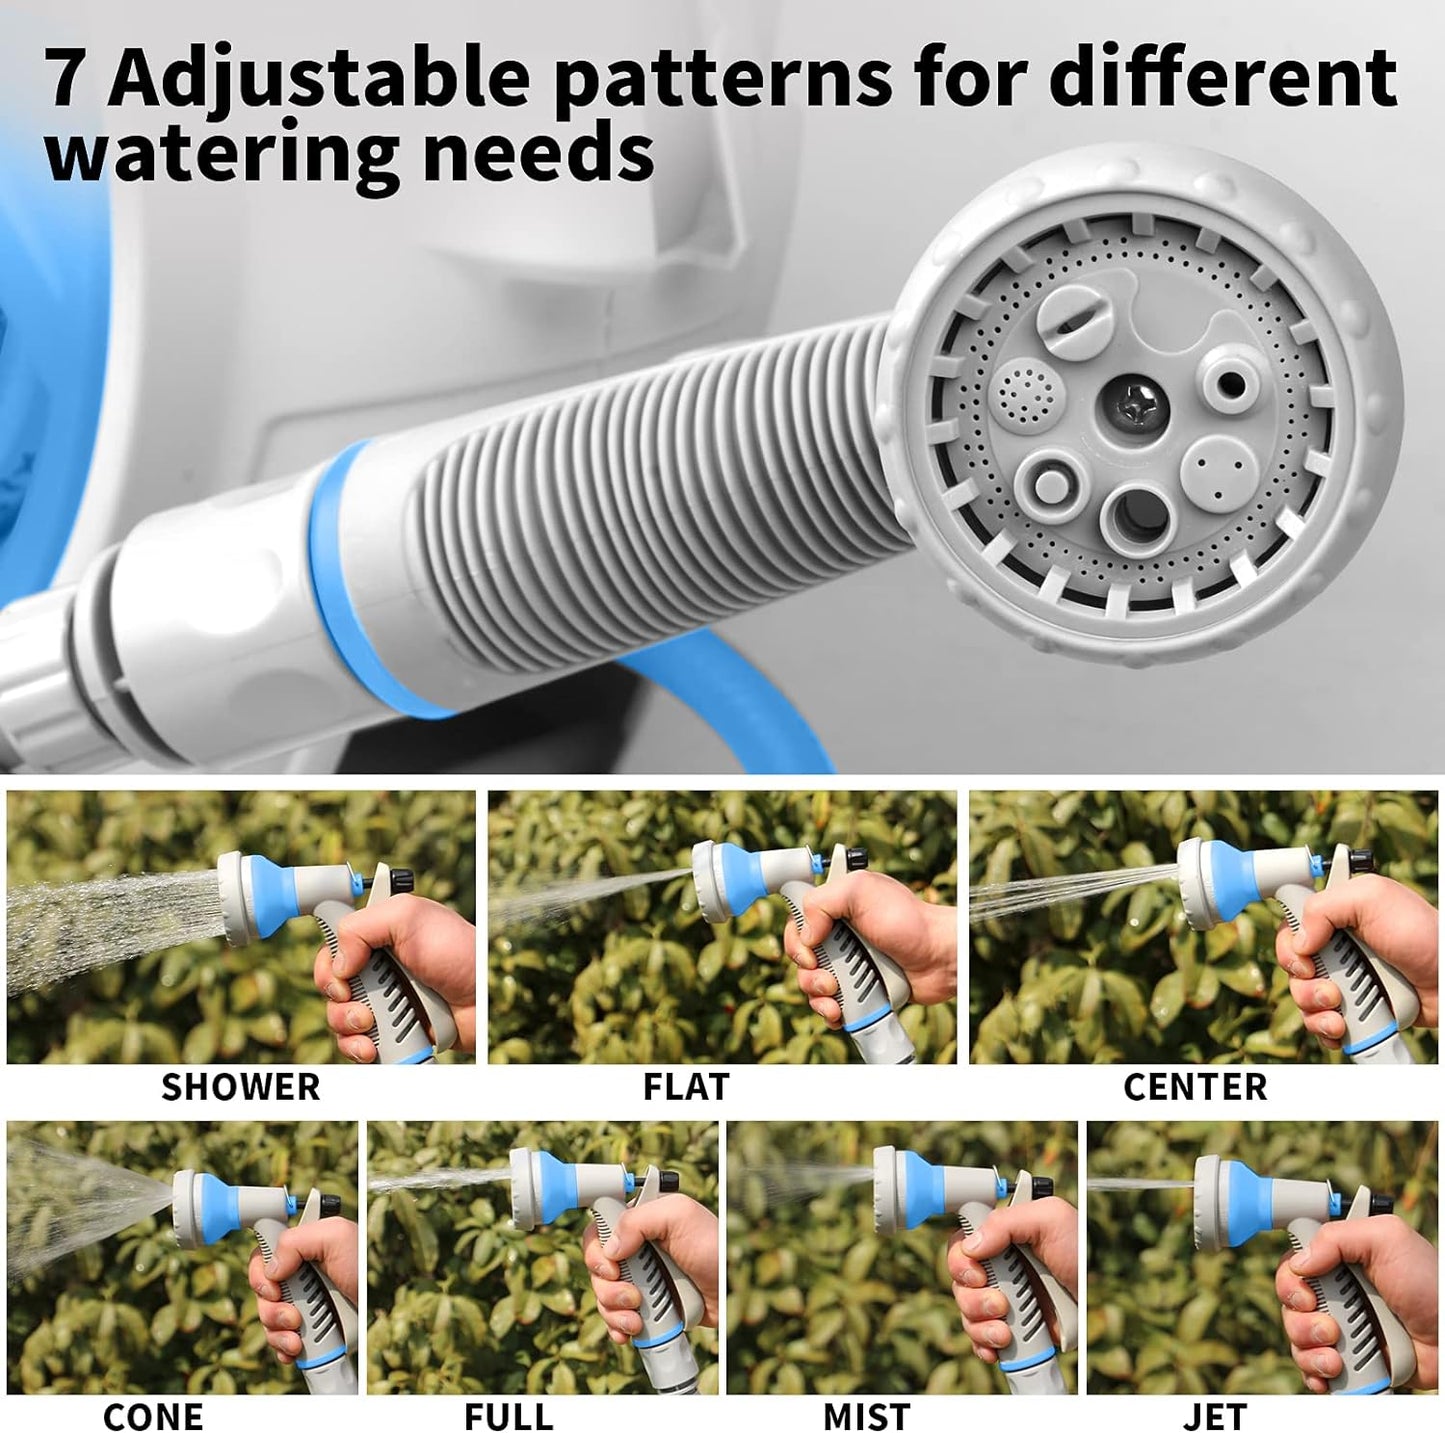 Garden Retractable Hose Reel, Portable Simple Home Hose Reel 45+5 FT with 7 Patterns Spray Nozzle, Wall Mounted and Any Length Lock for Garden Watering, Car Washing, Pet (Blue)